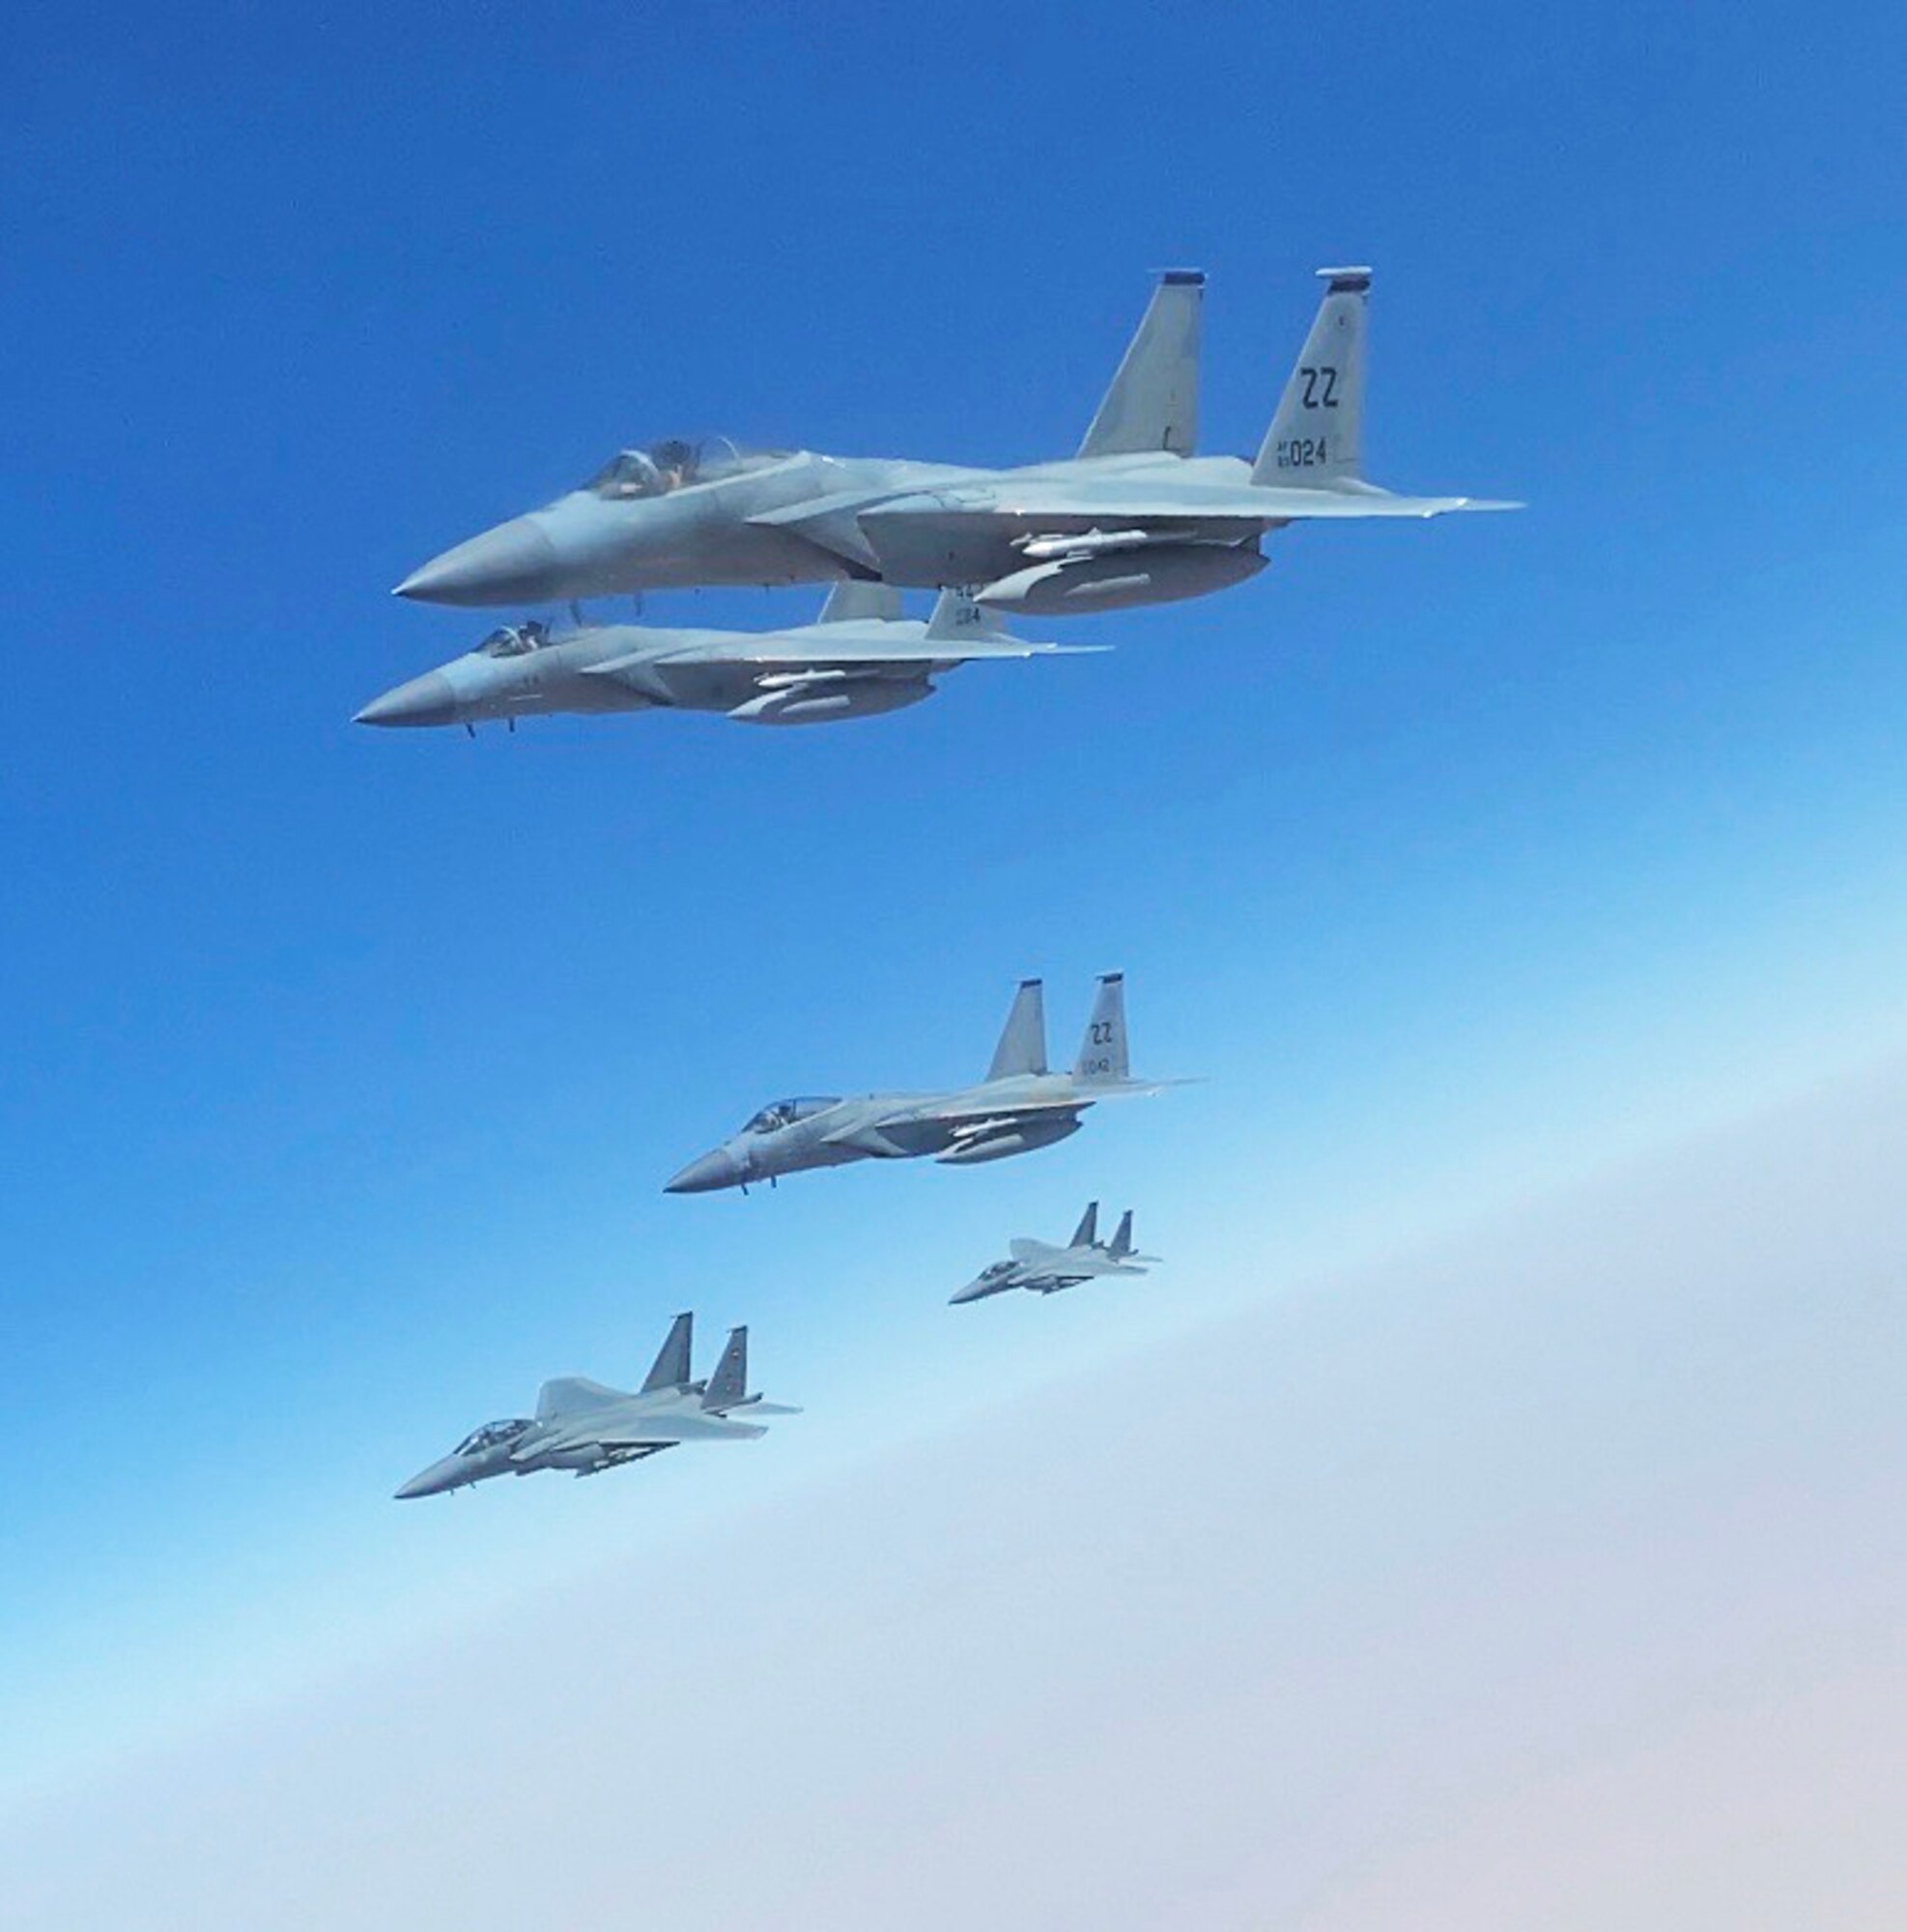 An F-15C fighter jet from the 44th Expeditionary Fighter Squadron, Prince Sultan Air Base, Kingdom of Saudi Arabia, flys in formation with two F-15SA Royal Saudi Air Force jets from the 6th Squadron, King Khalid Air Base, Kingdom of Saudi Arabia and a KC-135 Stratotanker from Al Udeid, Qutar, during an integrated sortie flight in the Kingdom of Saudi Araibia, June 25, 2020. The integrated sorties allow U.S. and RSAF pilots to famiiliaraize themselves with communications and mission planning procedures. It also allows them to maintain readiness for longer mission capabilities.